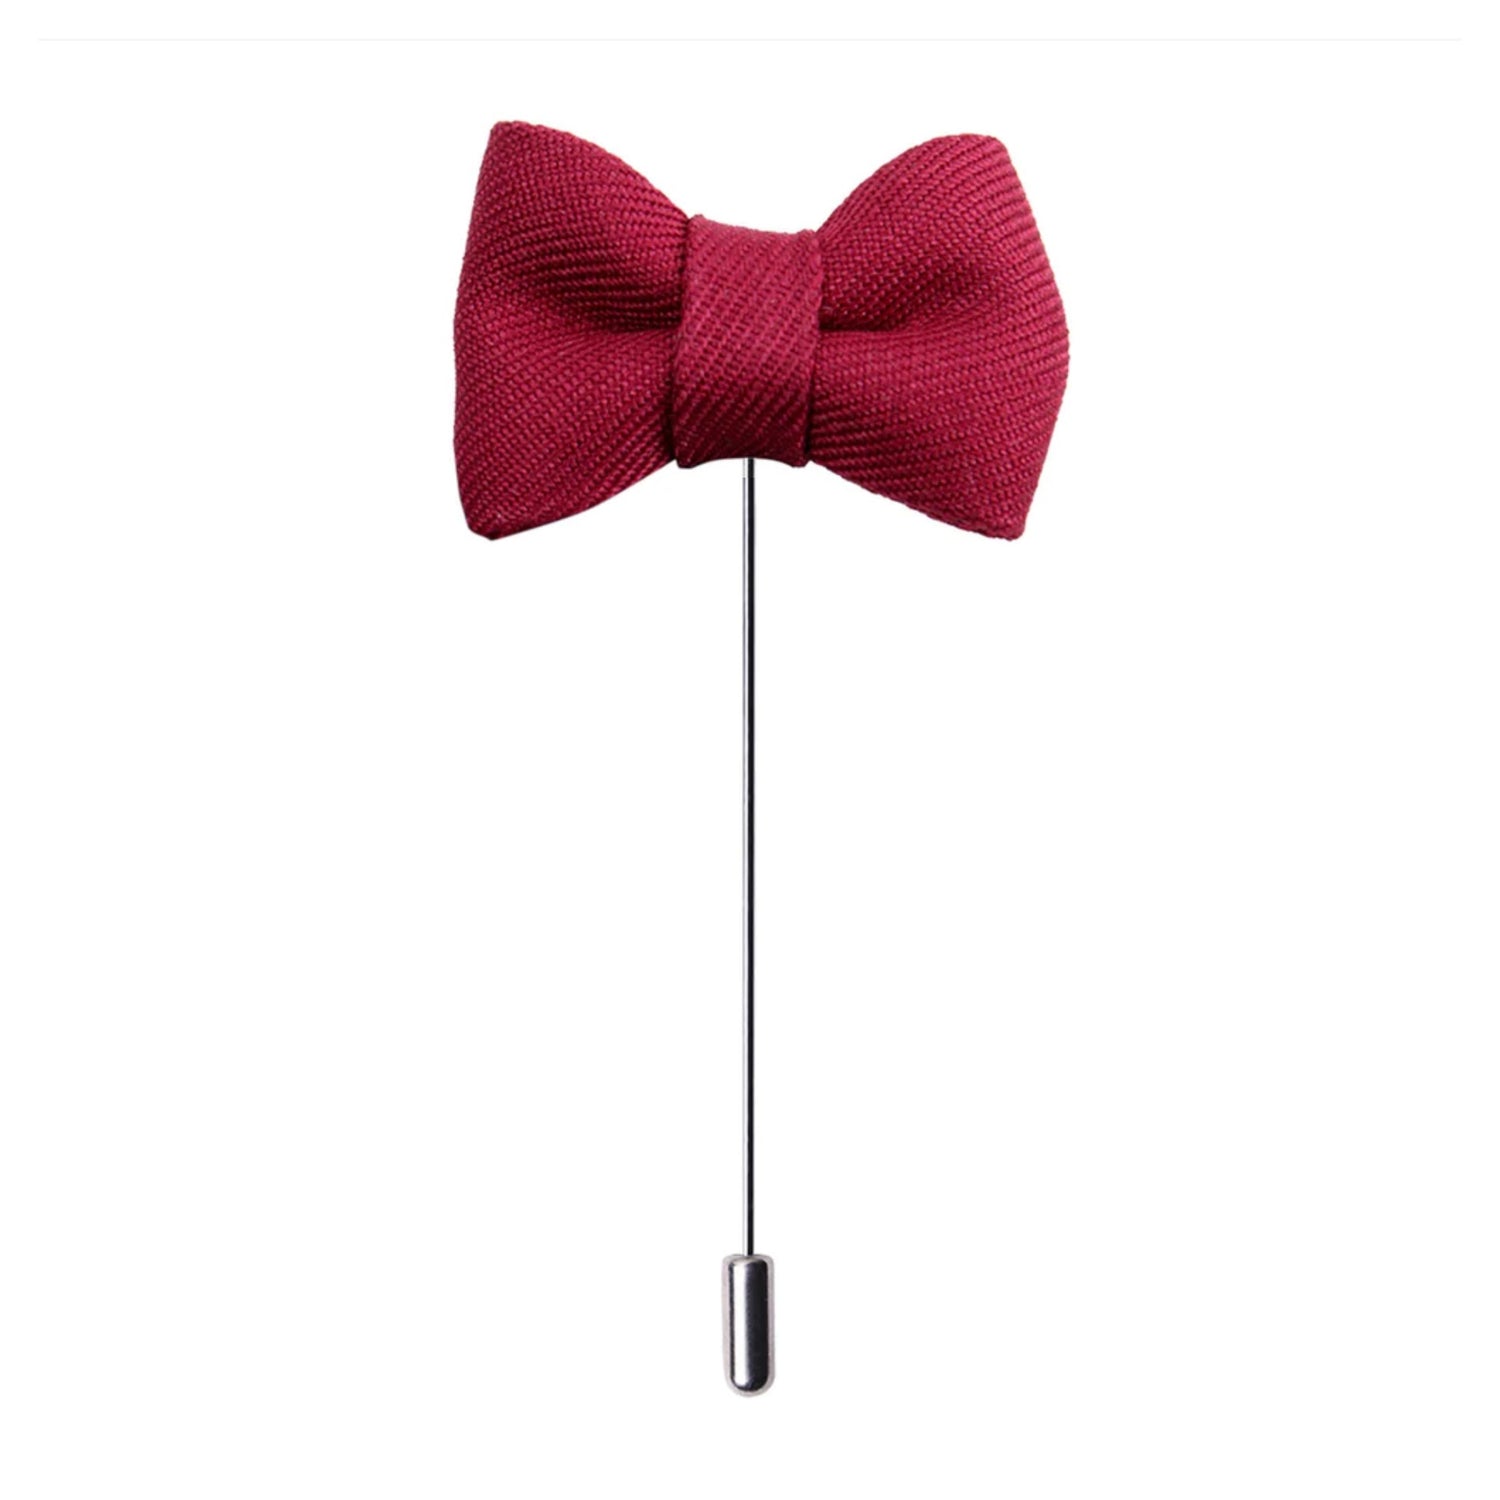 A Red Colored Bow Tie Shaped Lapel Pin||Light Red